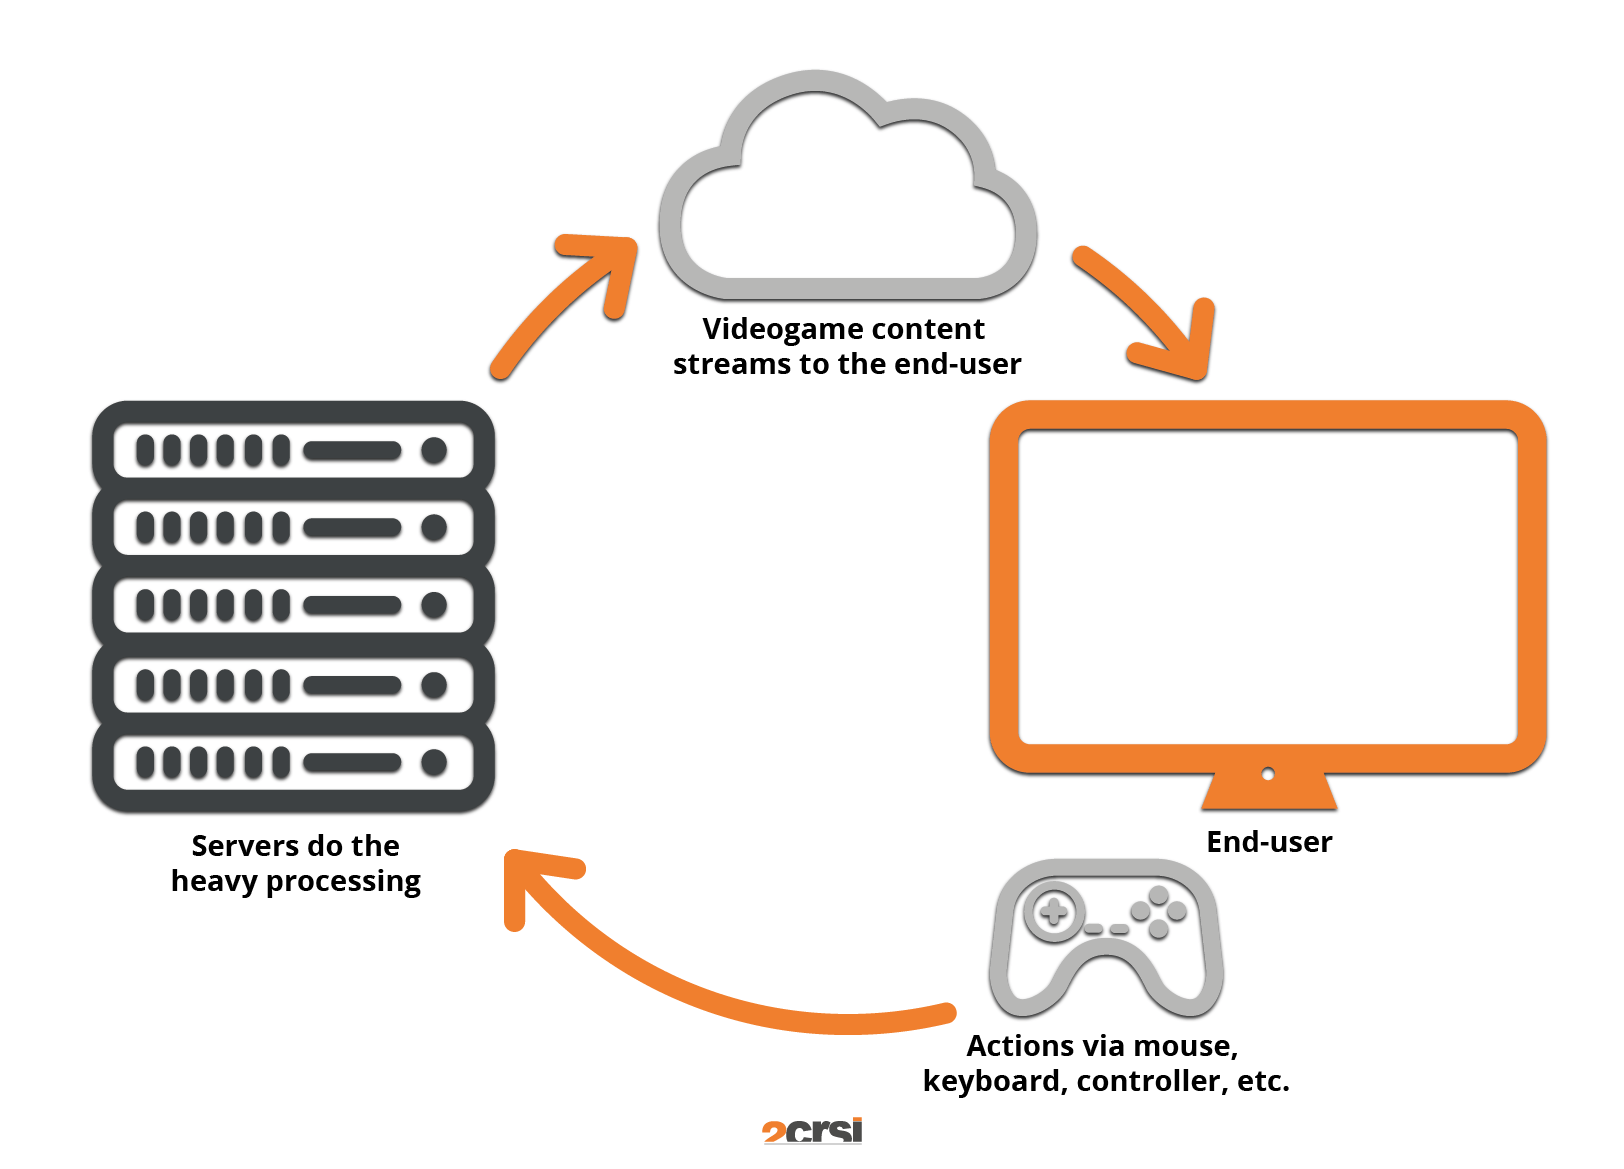 What is Cloud Gaming?